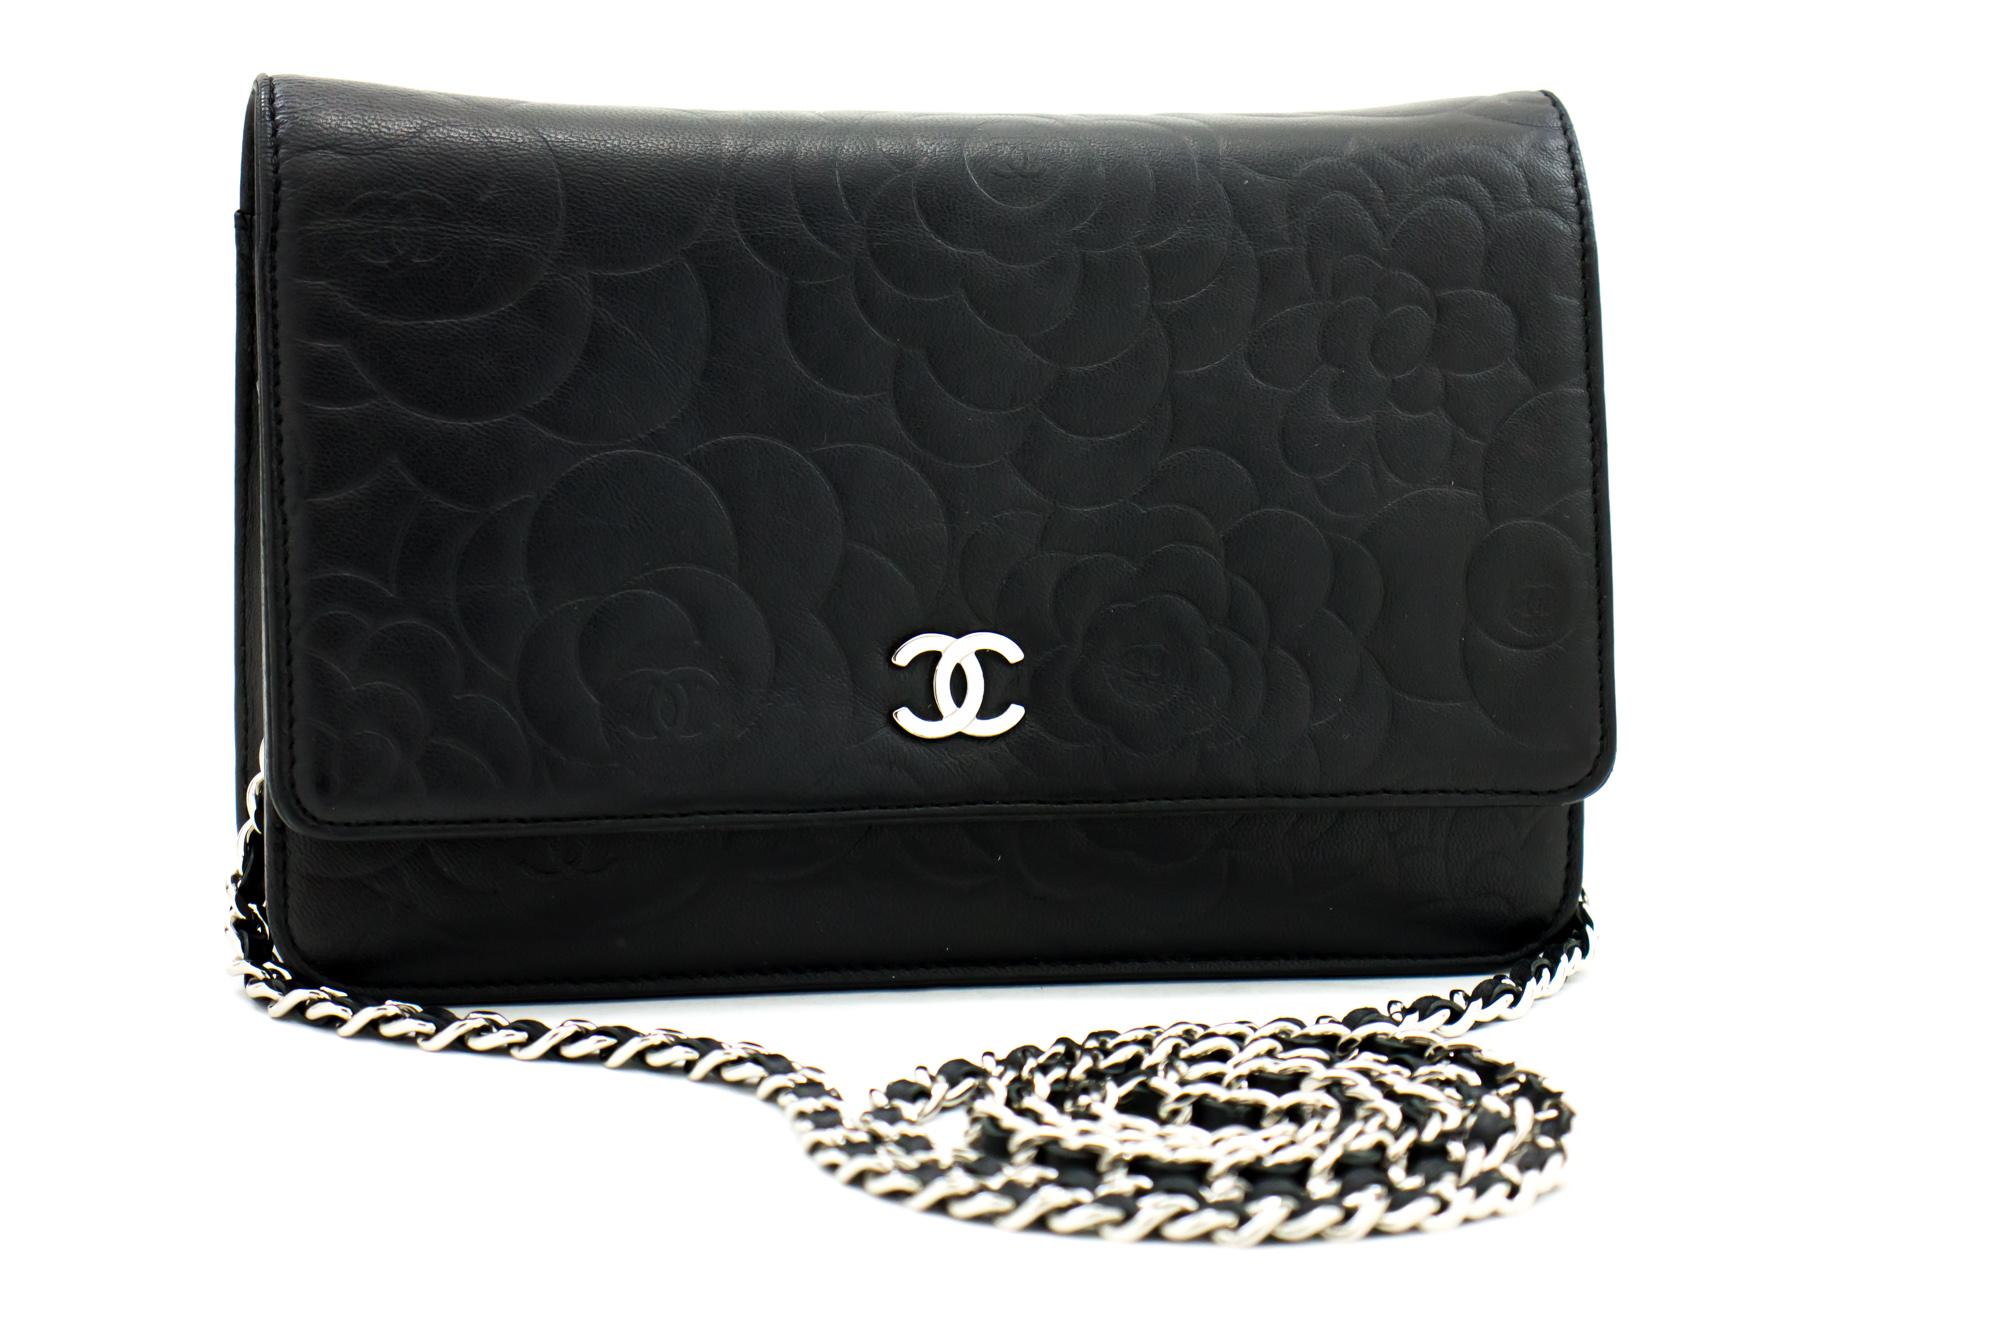 An authentic CHANEL Black Camellia Embossed Wallet On Chain WOC Shoulder Bag Silver. The color is Black. The outside material is Leather. The pattern is Embossed. This item is Contemporary. The year of manufacture would be 2012.
Conditions &